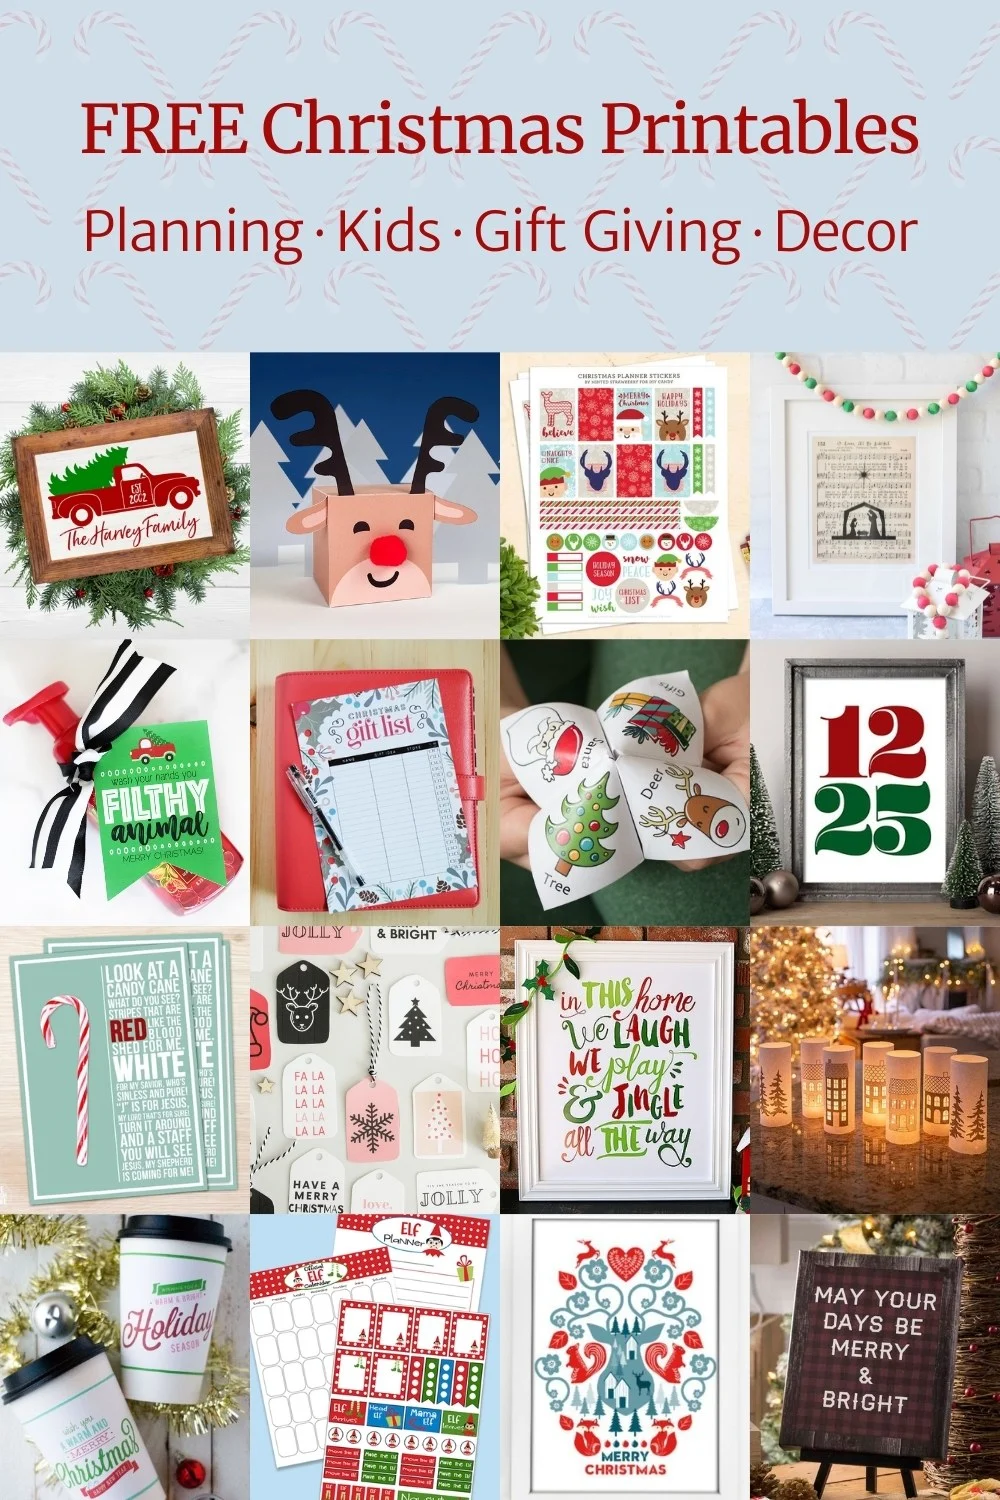 50+ Fun Family Christmas Gift Ideas for Every Budget - What Mommy Does